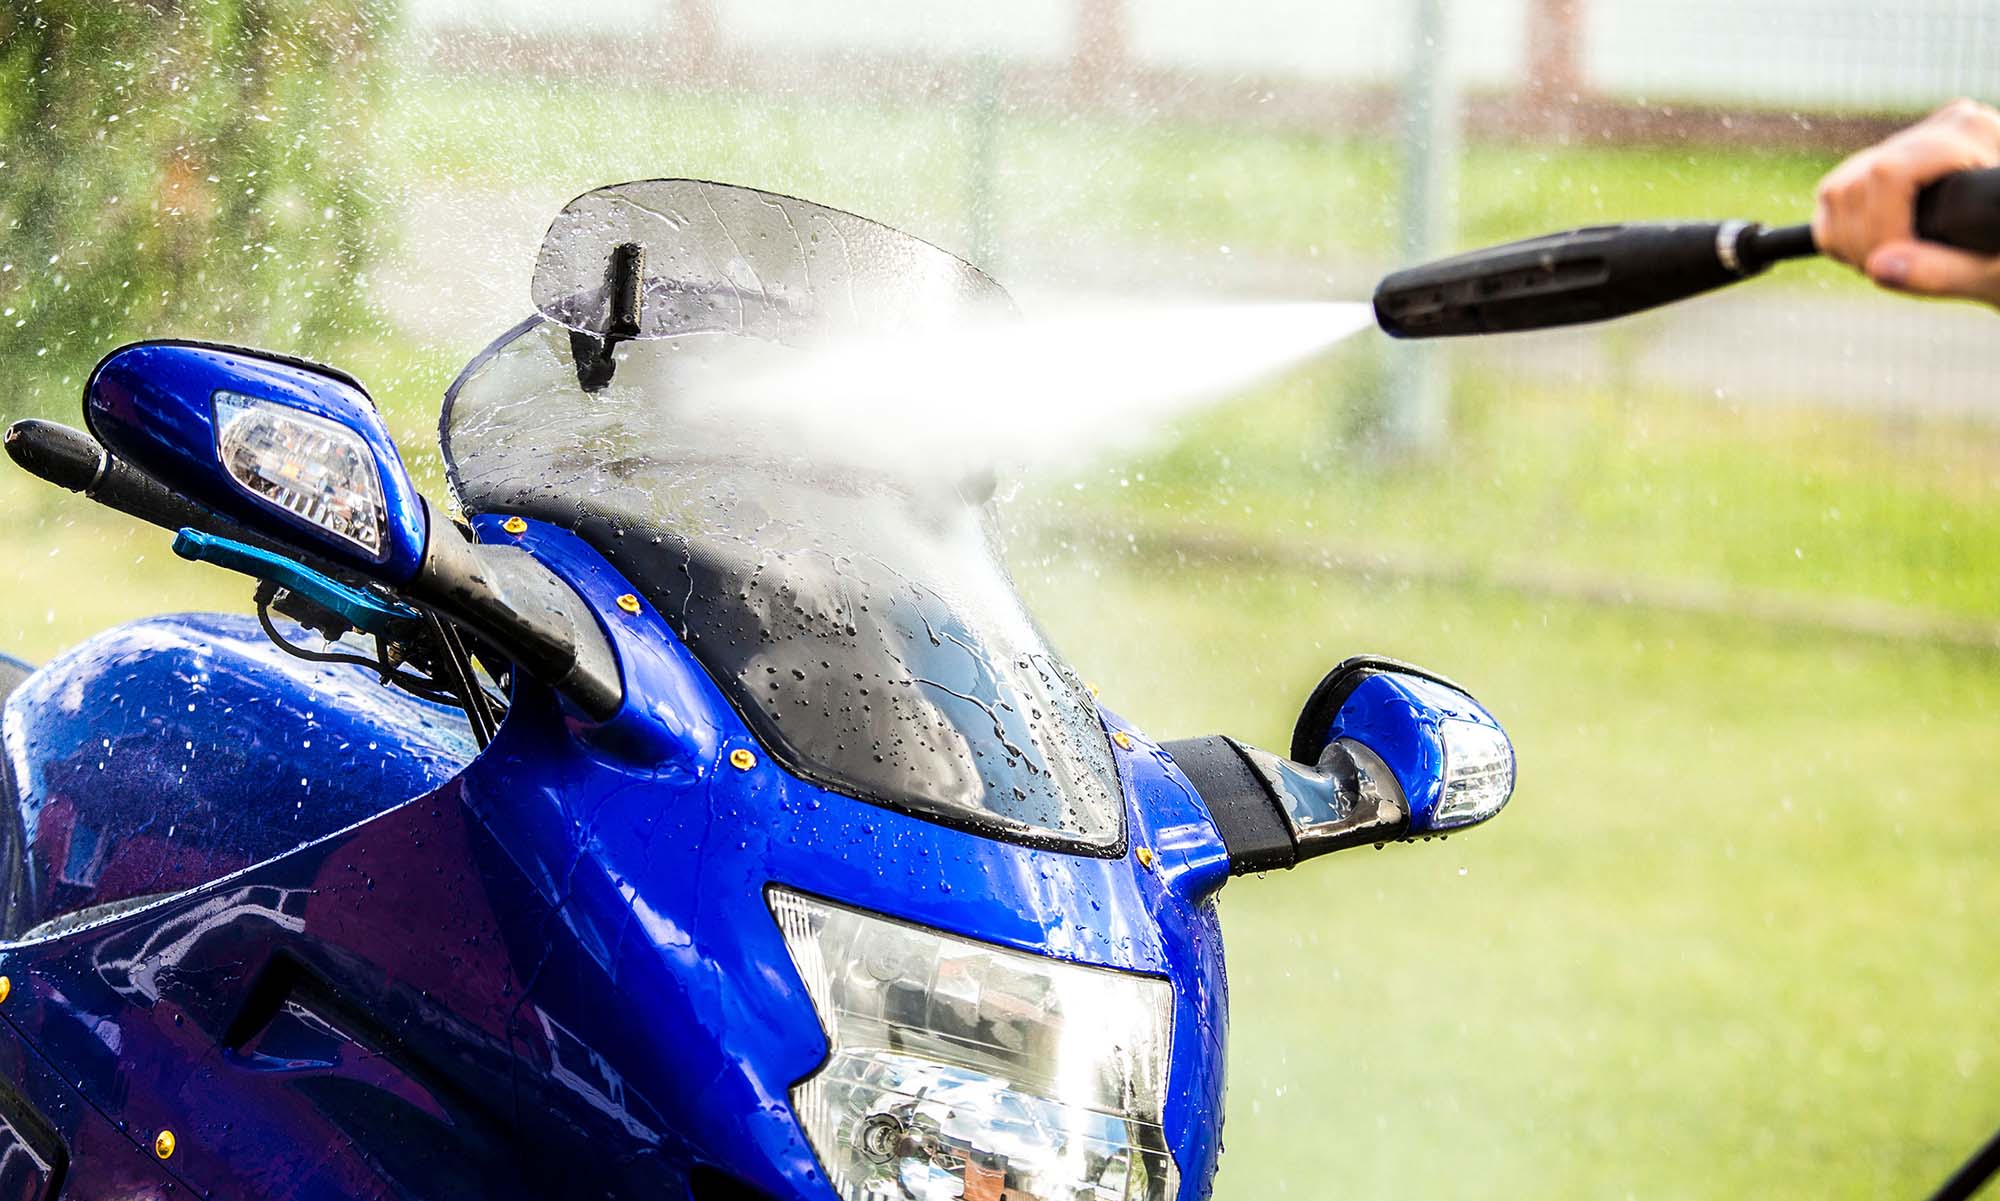 Washing the windscreen of a motorcycle with a pressure washer